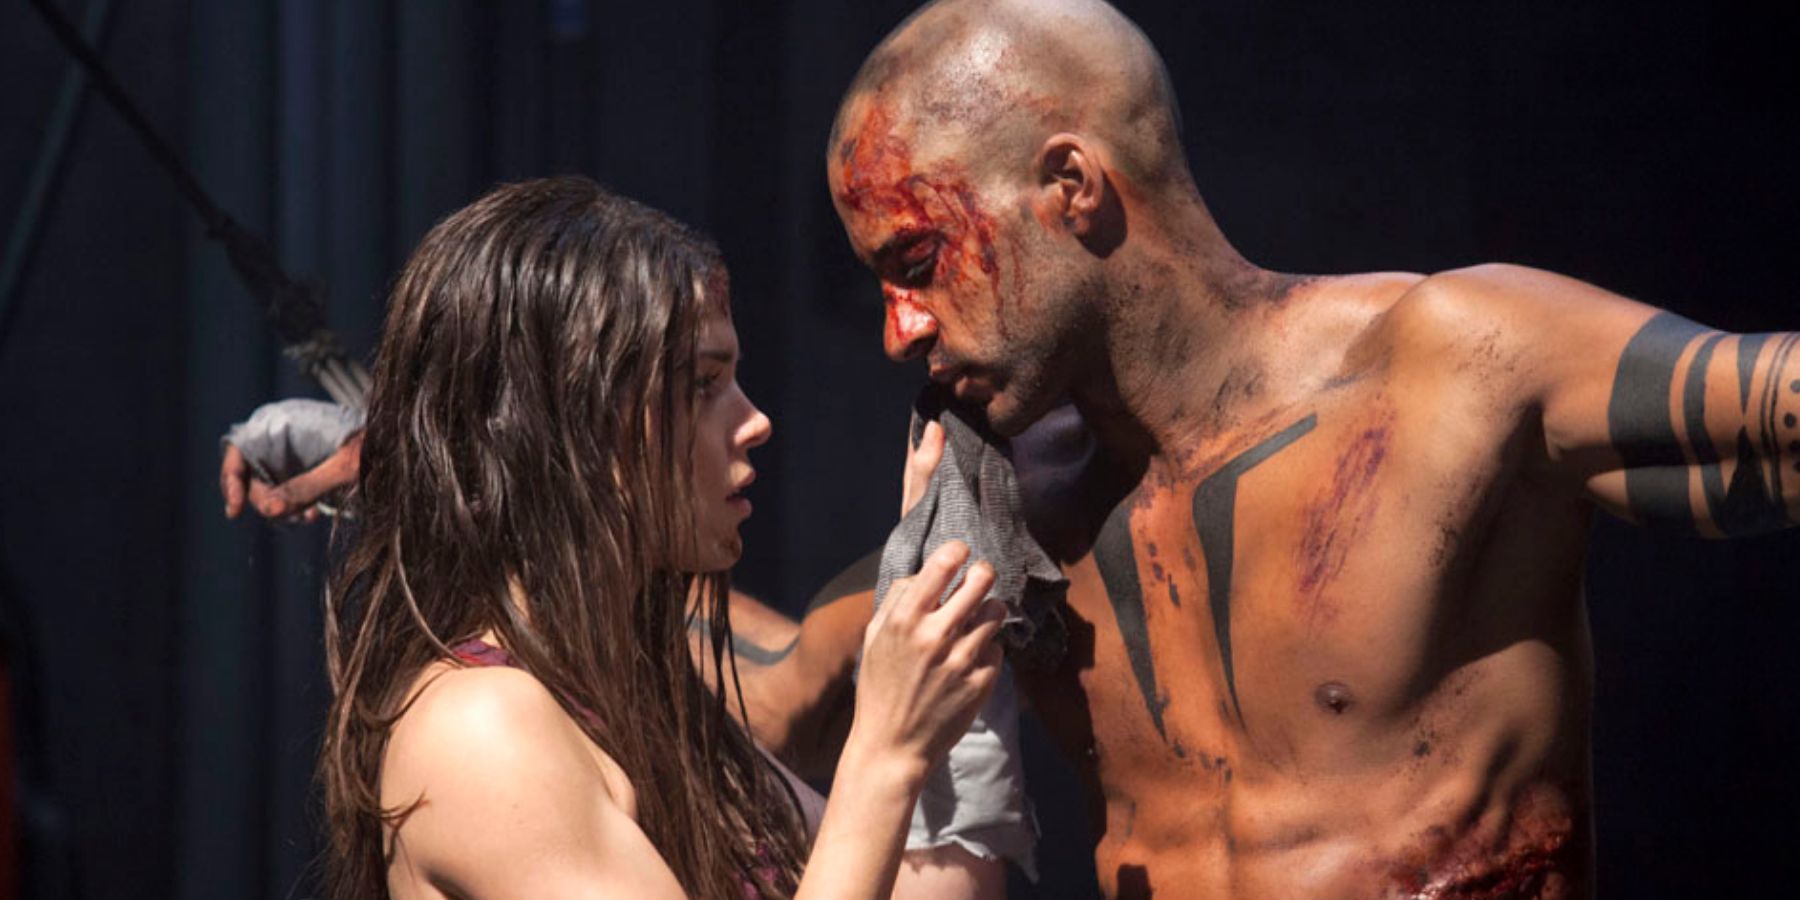 Octavia helps Lincoln after he is tortured in The 100